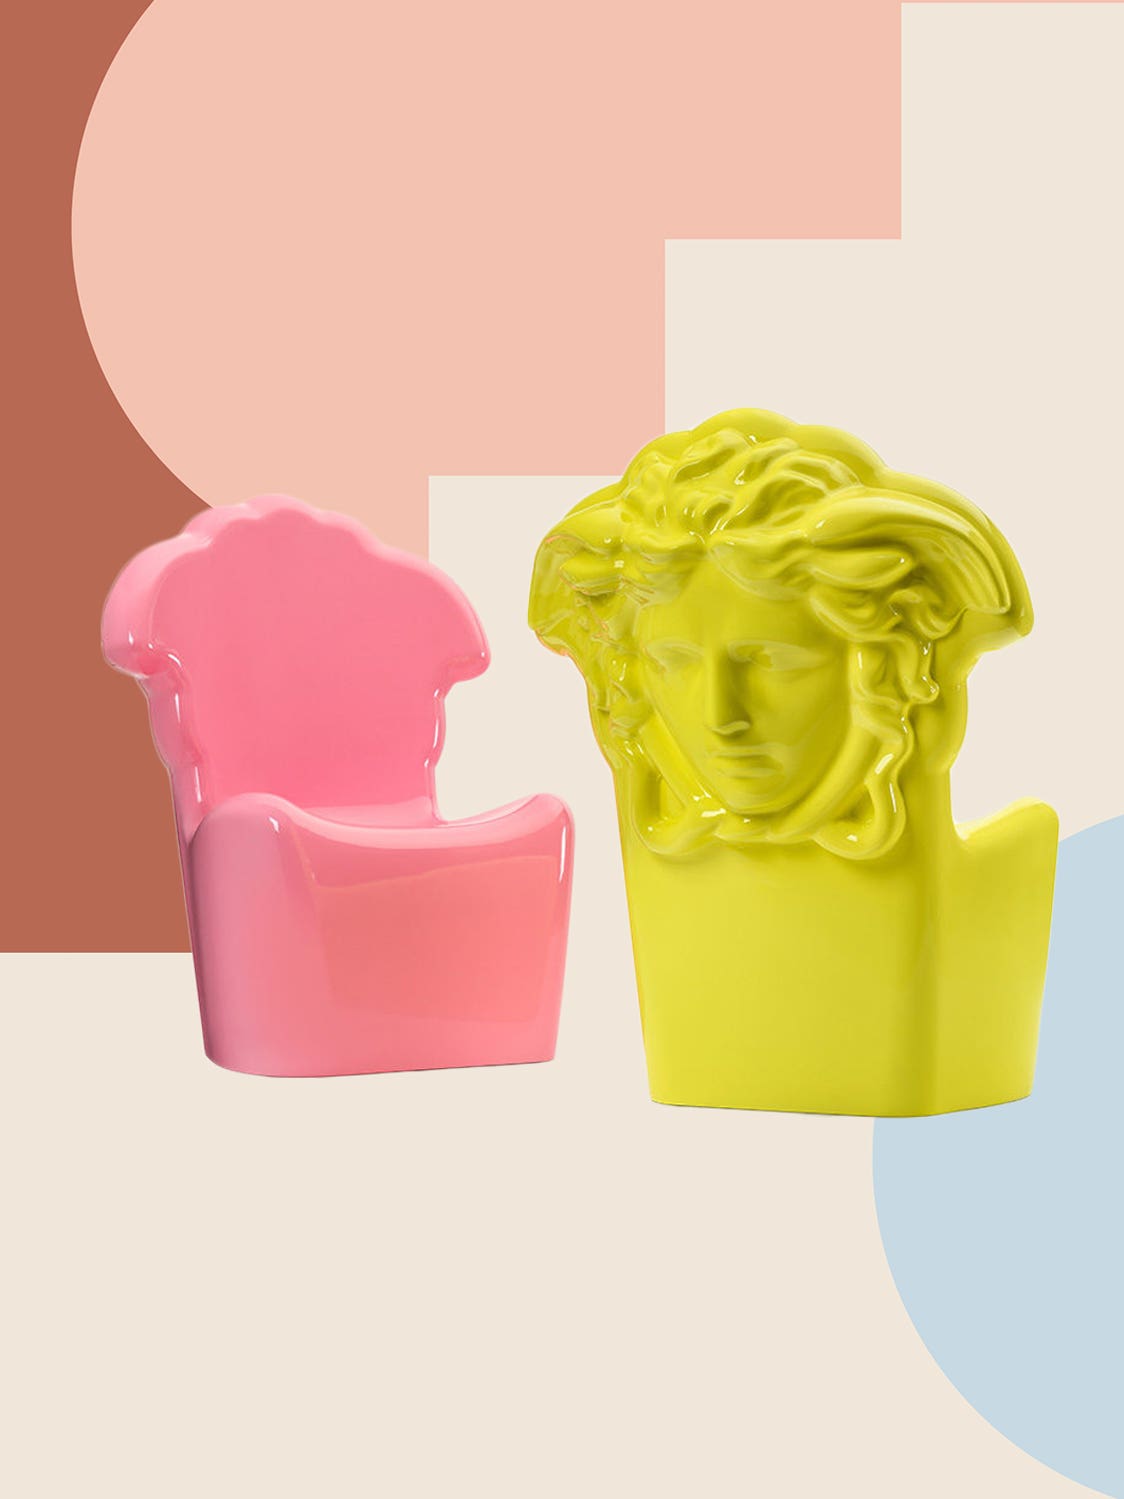 You’ll See Versace’s Candy-Colored Chairs in Every Celebrity Home This Year